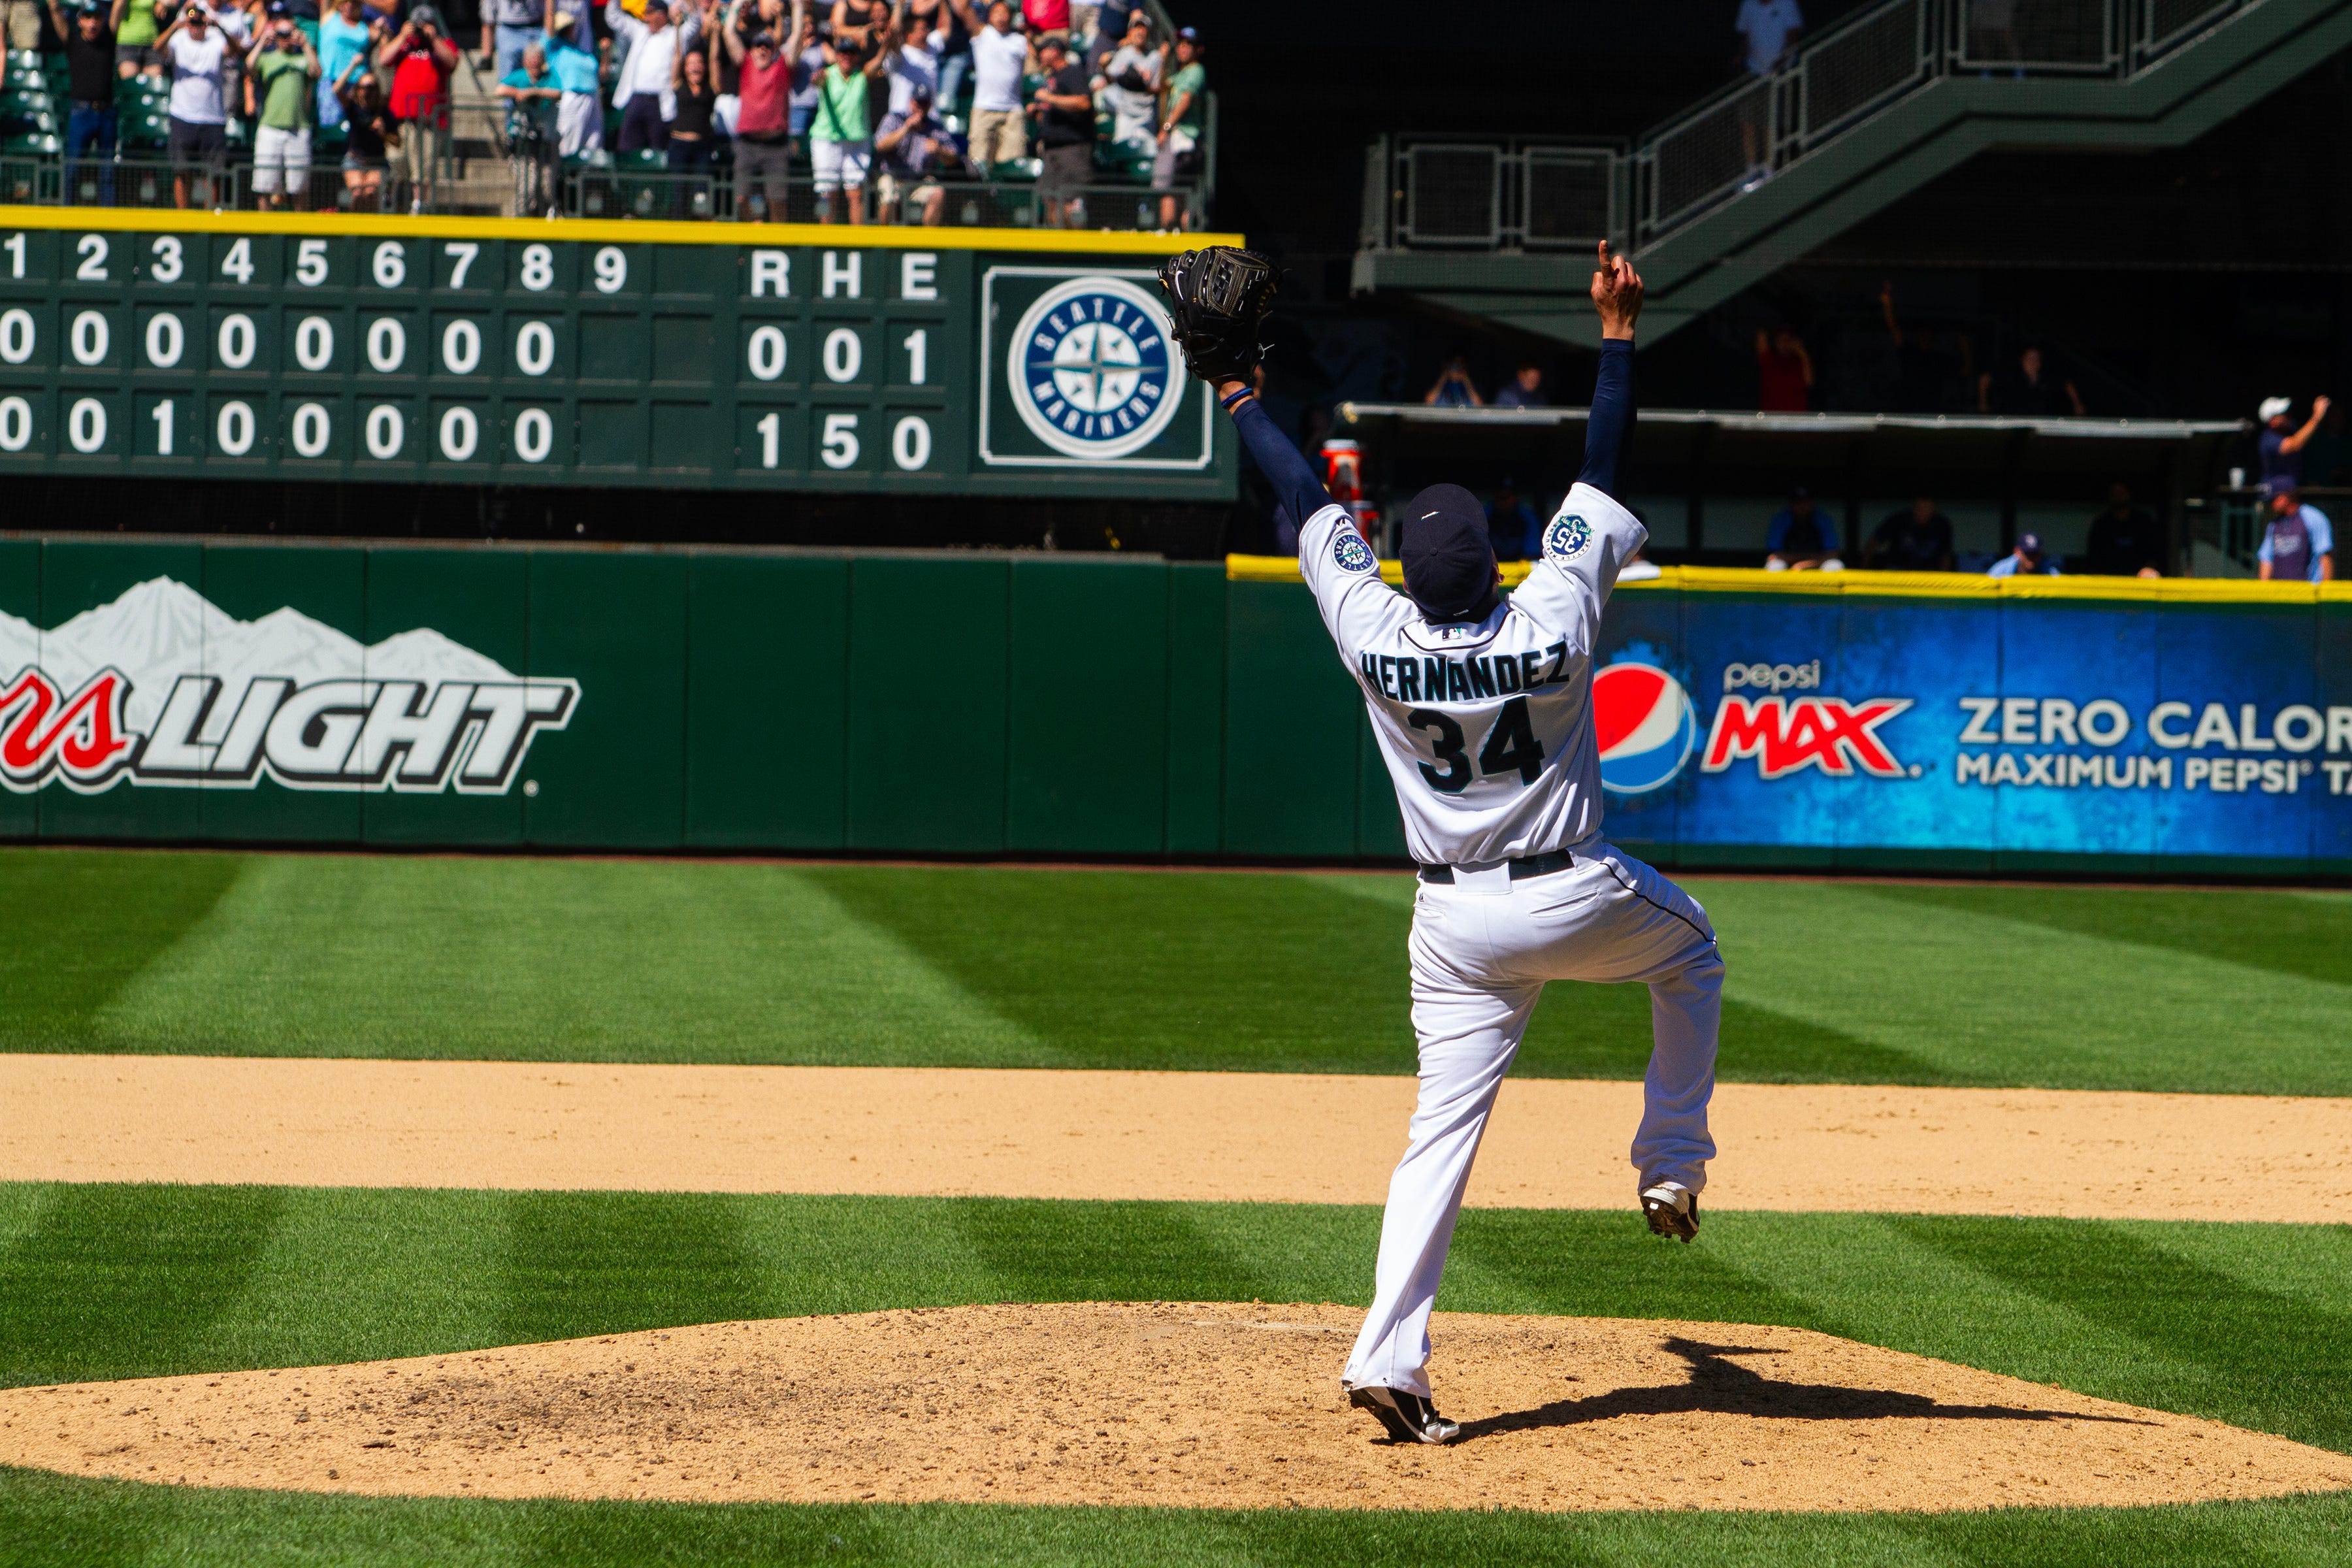 Felix Hernandez Inducted into Seattle Mariners Hall of Fame in Emotional  Ceremony - Fastball